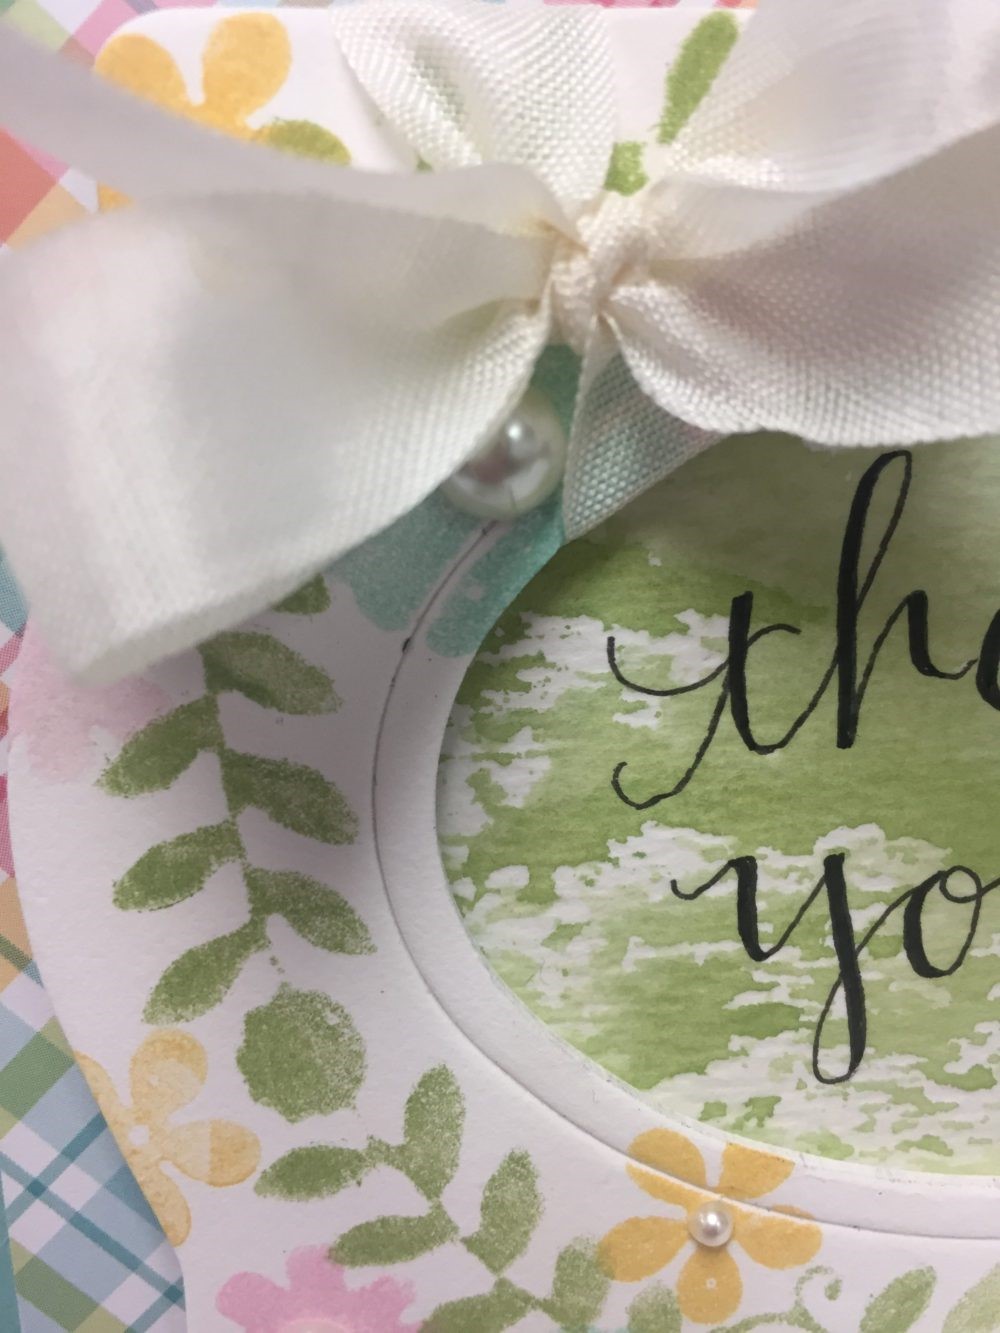 Detail picture of a Thank You Card designed by Eileen Hull | Creative Scrapbooker Magazine